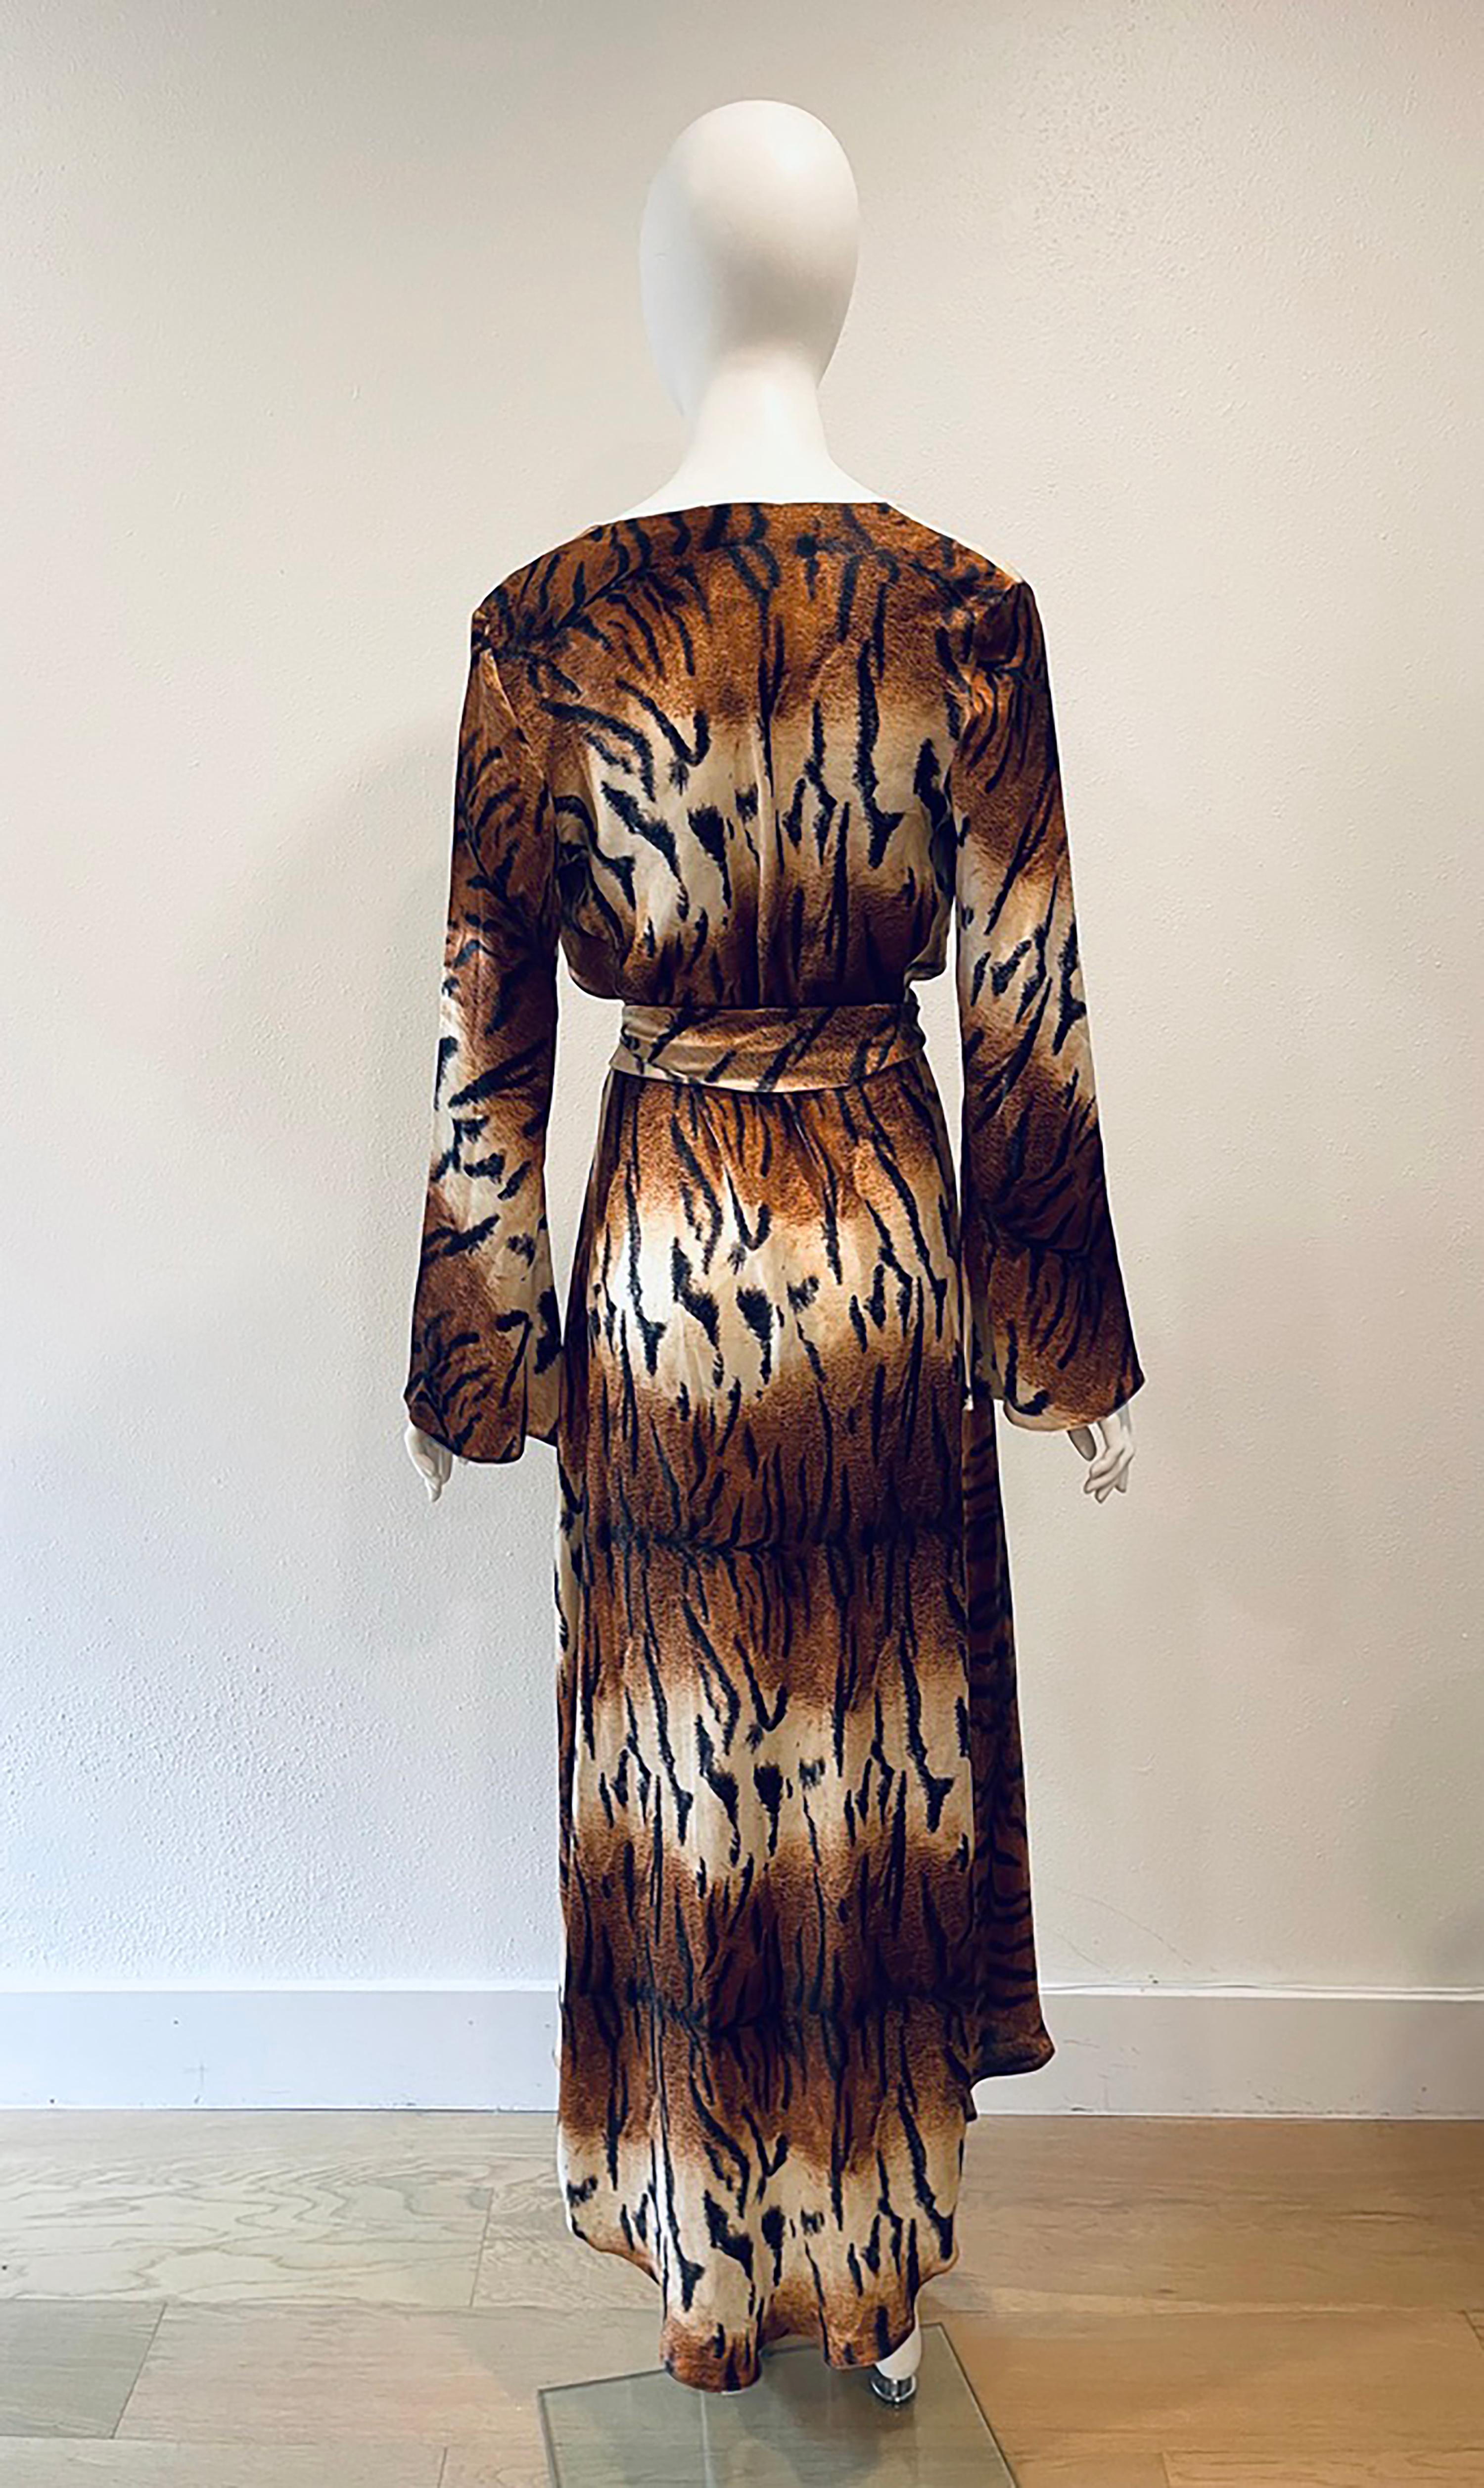 F/W 2000 Roberto Cavalli Silk Tiger Print Wrap Dress
Unworn w Tags
Condition:Excellent
Silk
Made in Italy
Bust 34